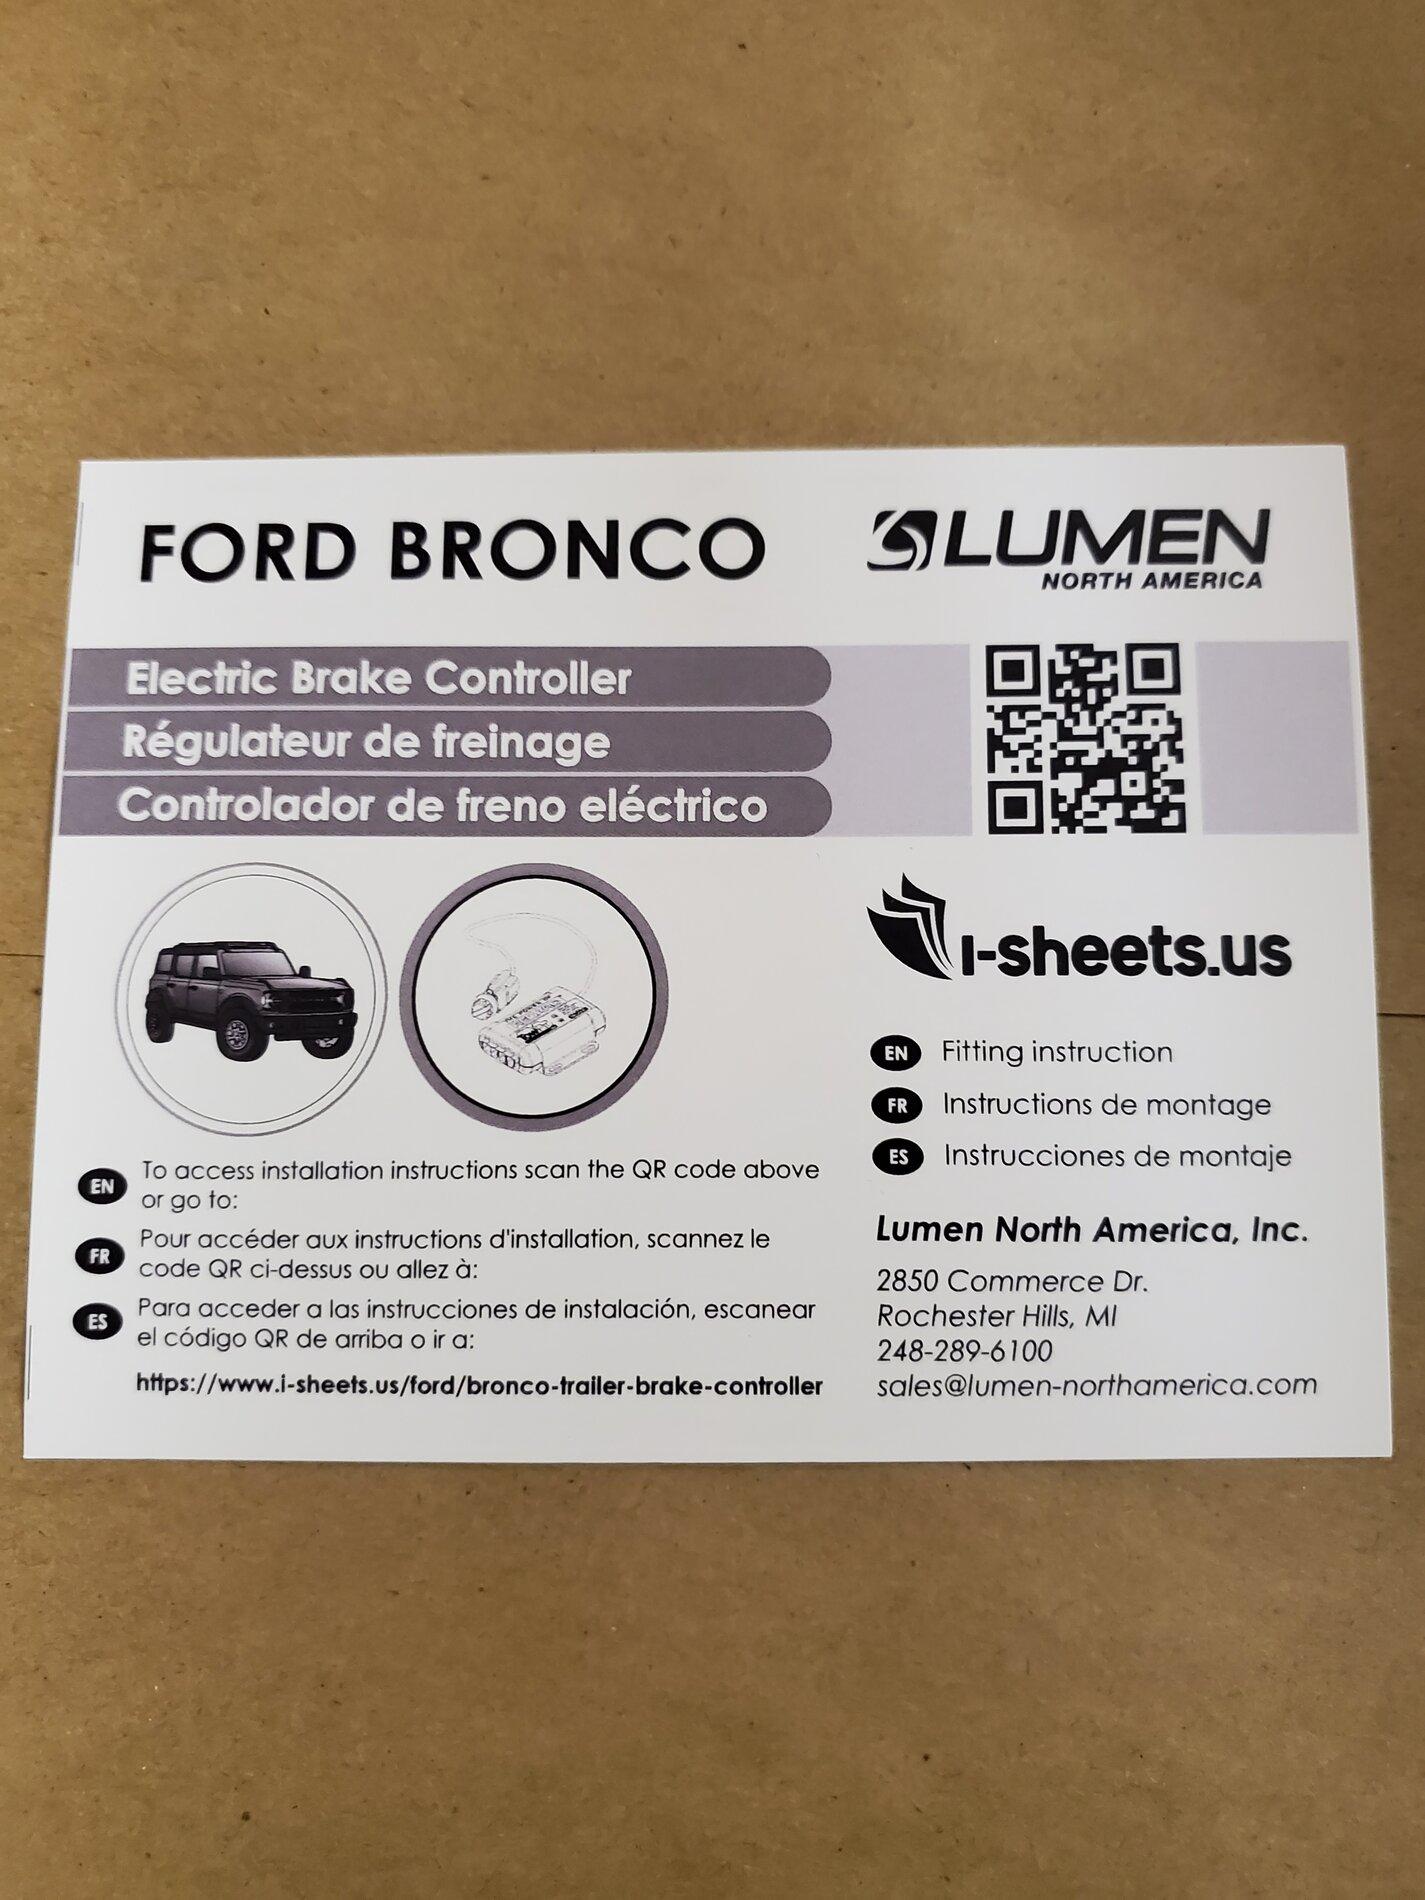 Ford Bronco Ford trailer brake controller unboxing 20210807_235958